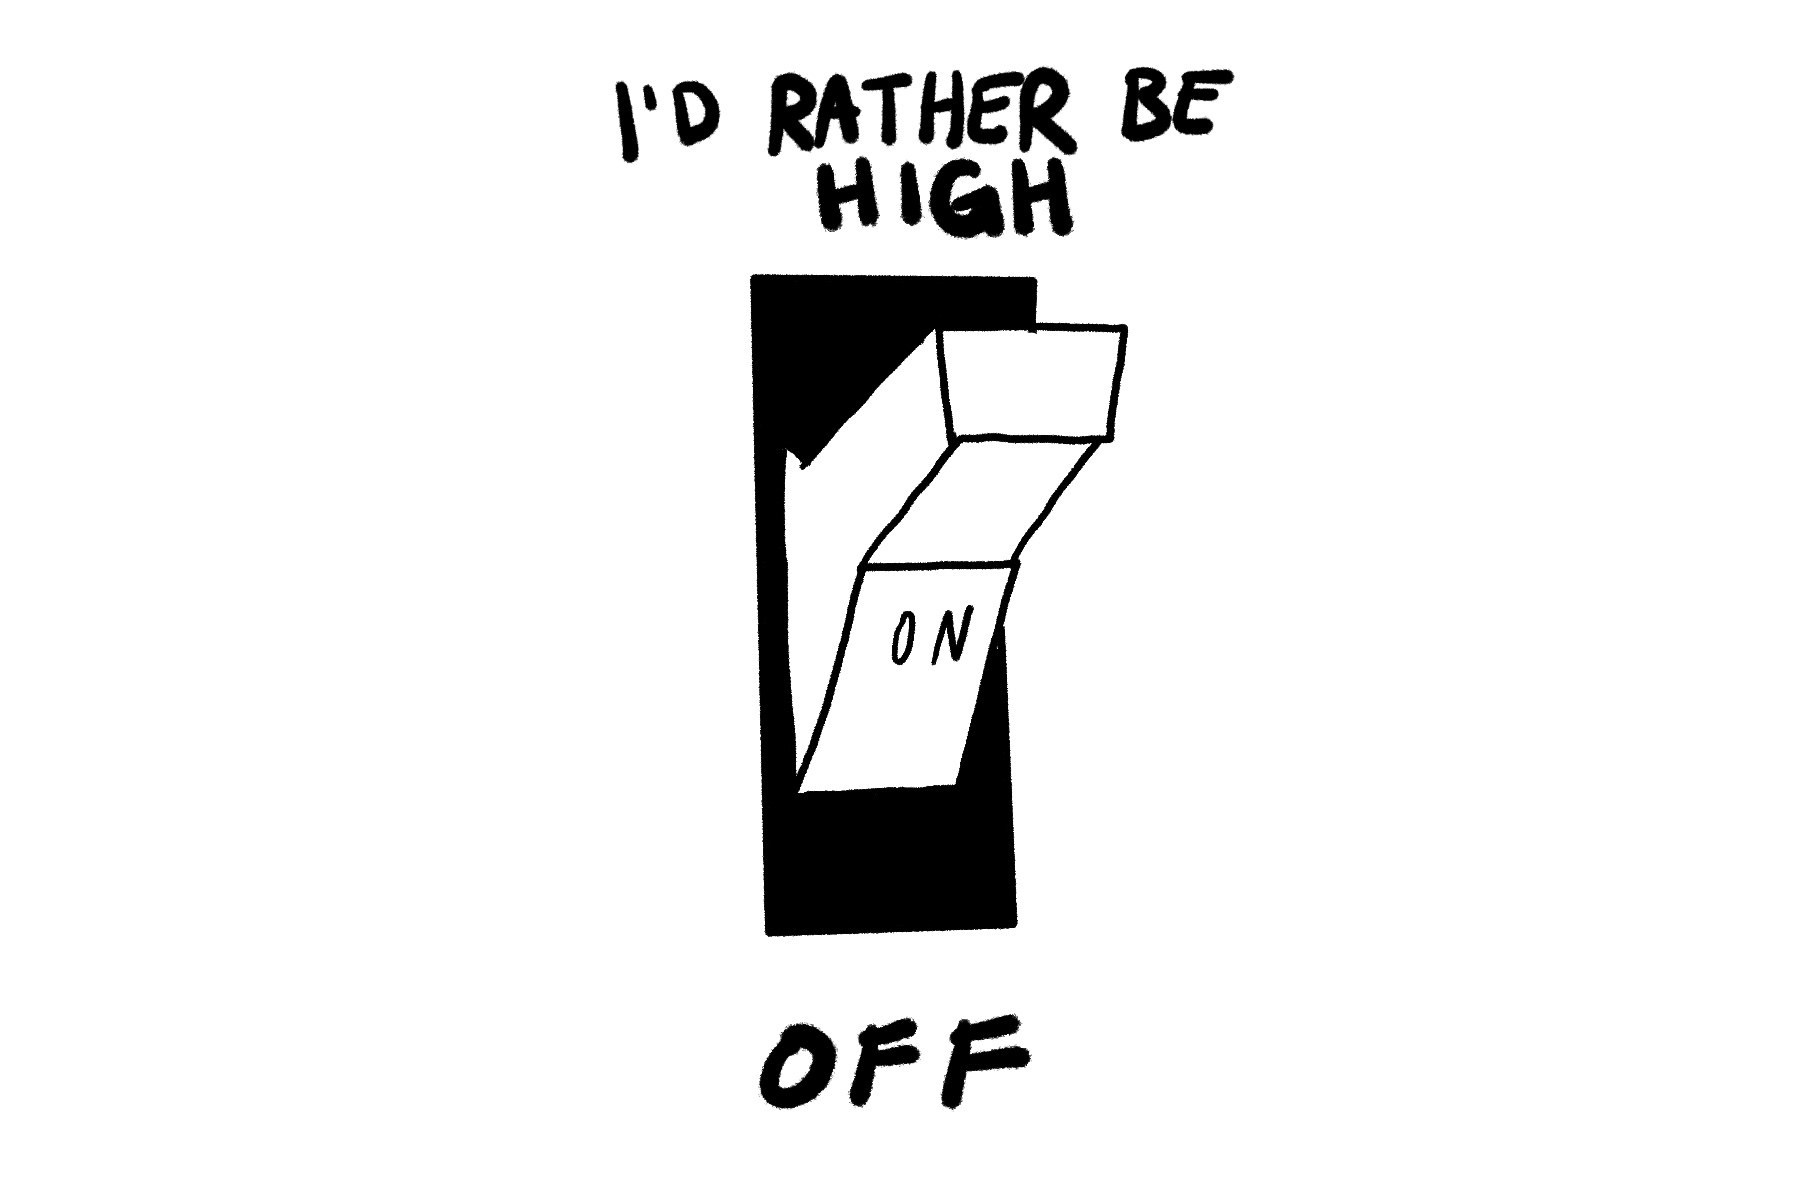 Doodle of on/off switch, except on reads &quot;I&#x27;d rather be high&quot;